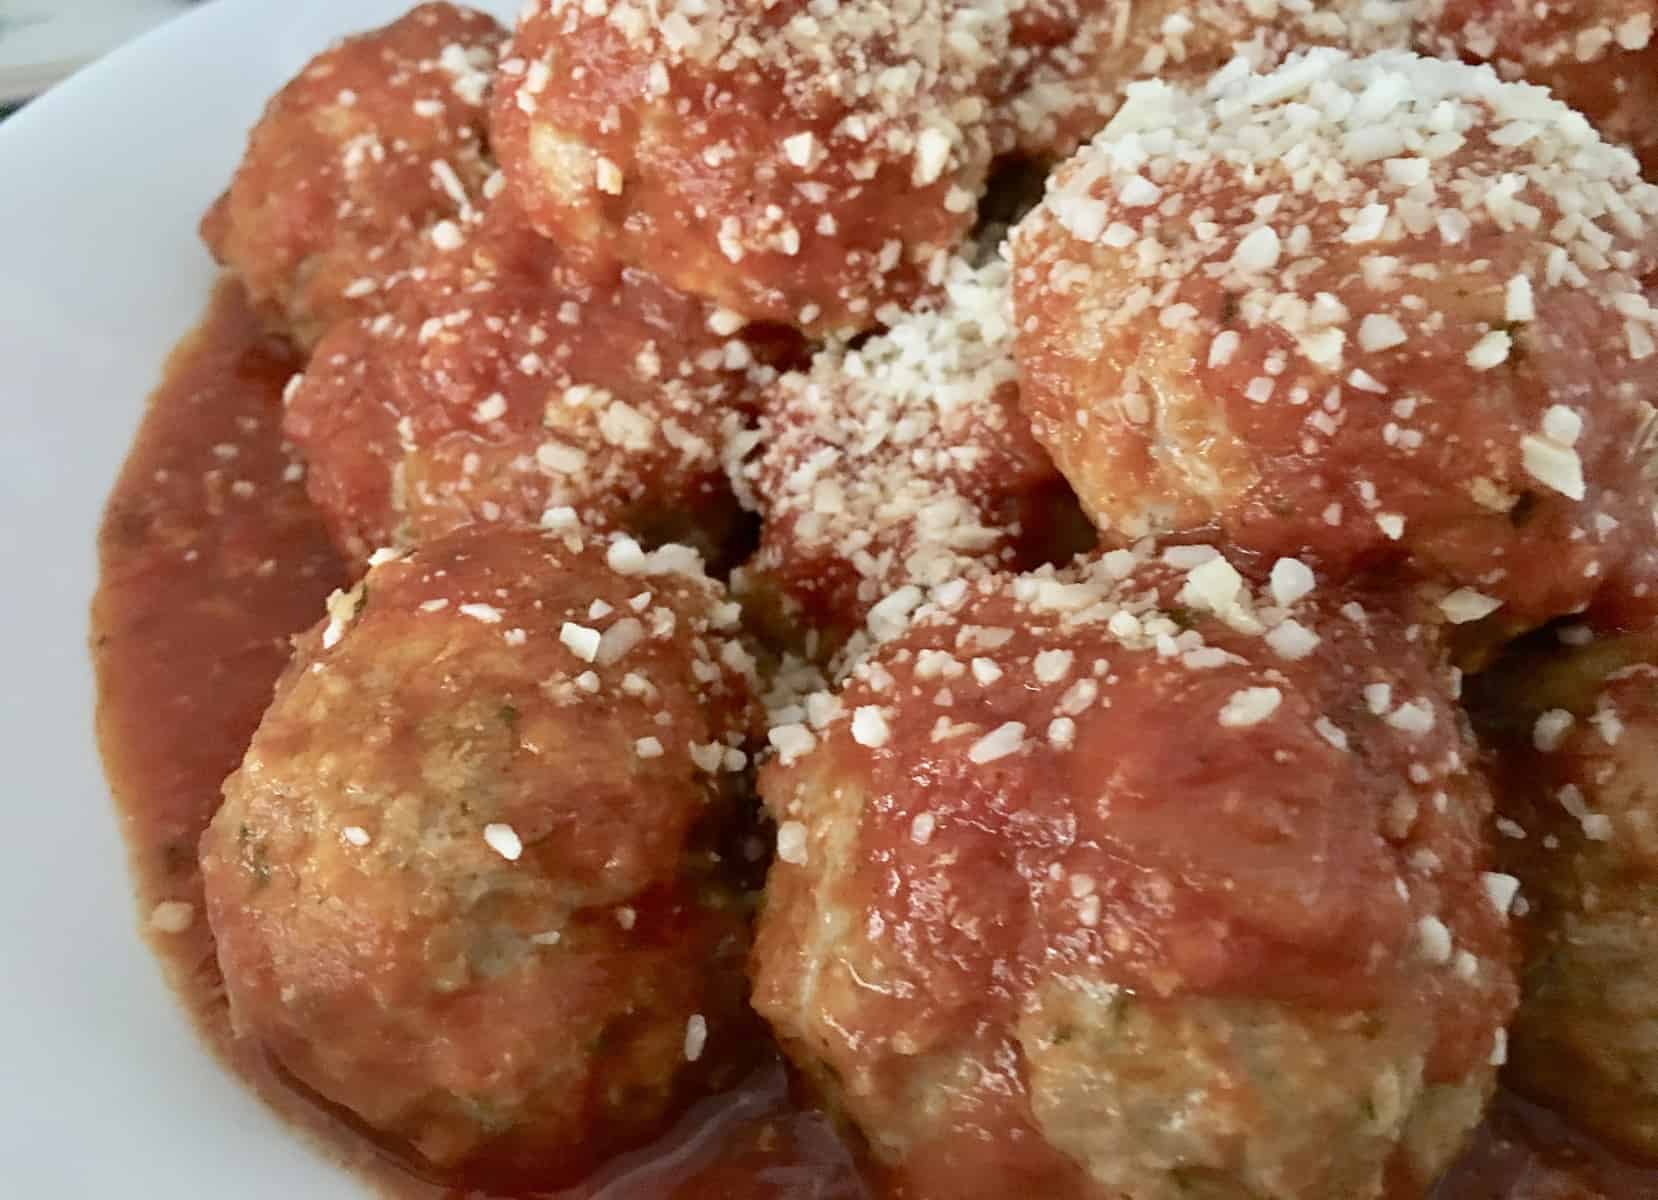 Make-Ahead Turkey Italian Meatballs are the classic meatball recipe only healthy. Easy and delicious, these are great served over pasta, on slider buns, or by themselves as appetizers. #meatballs #groundturkey #classic #italian #recipe #easy #weeknightdinner #parenting 